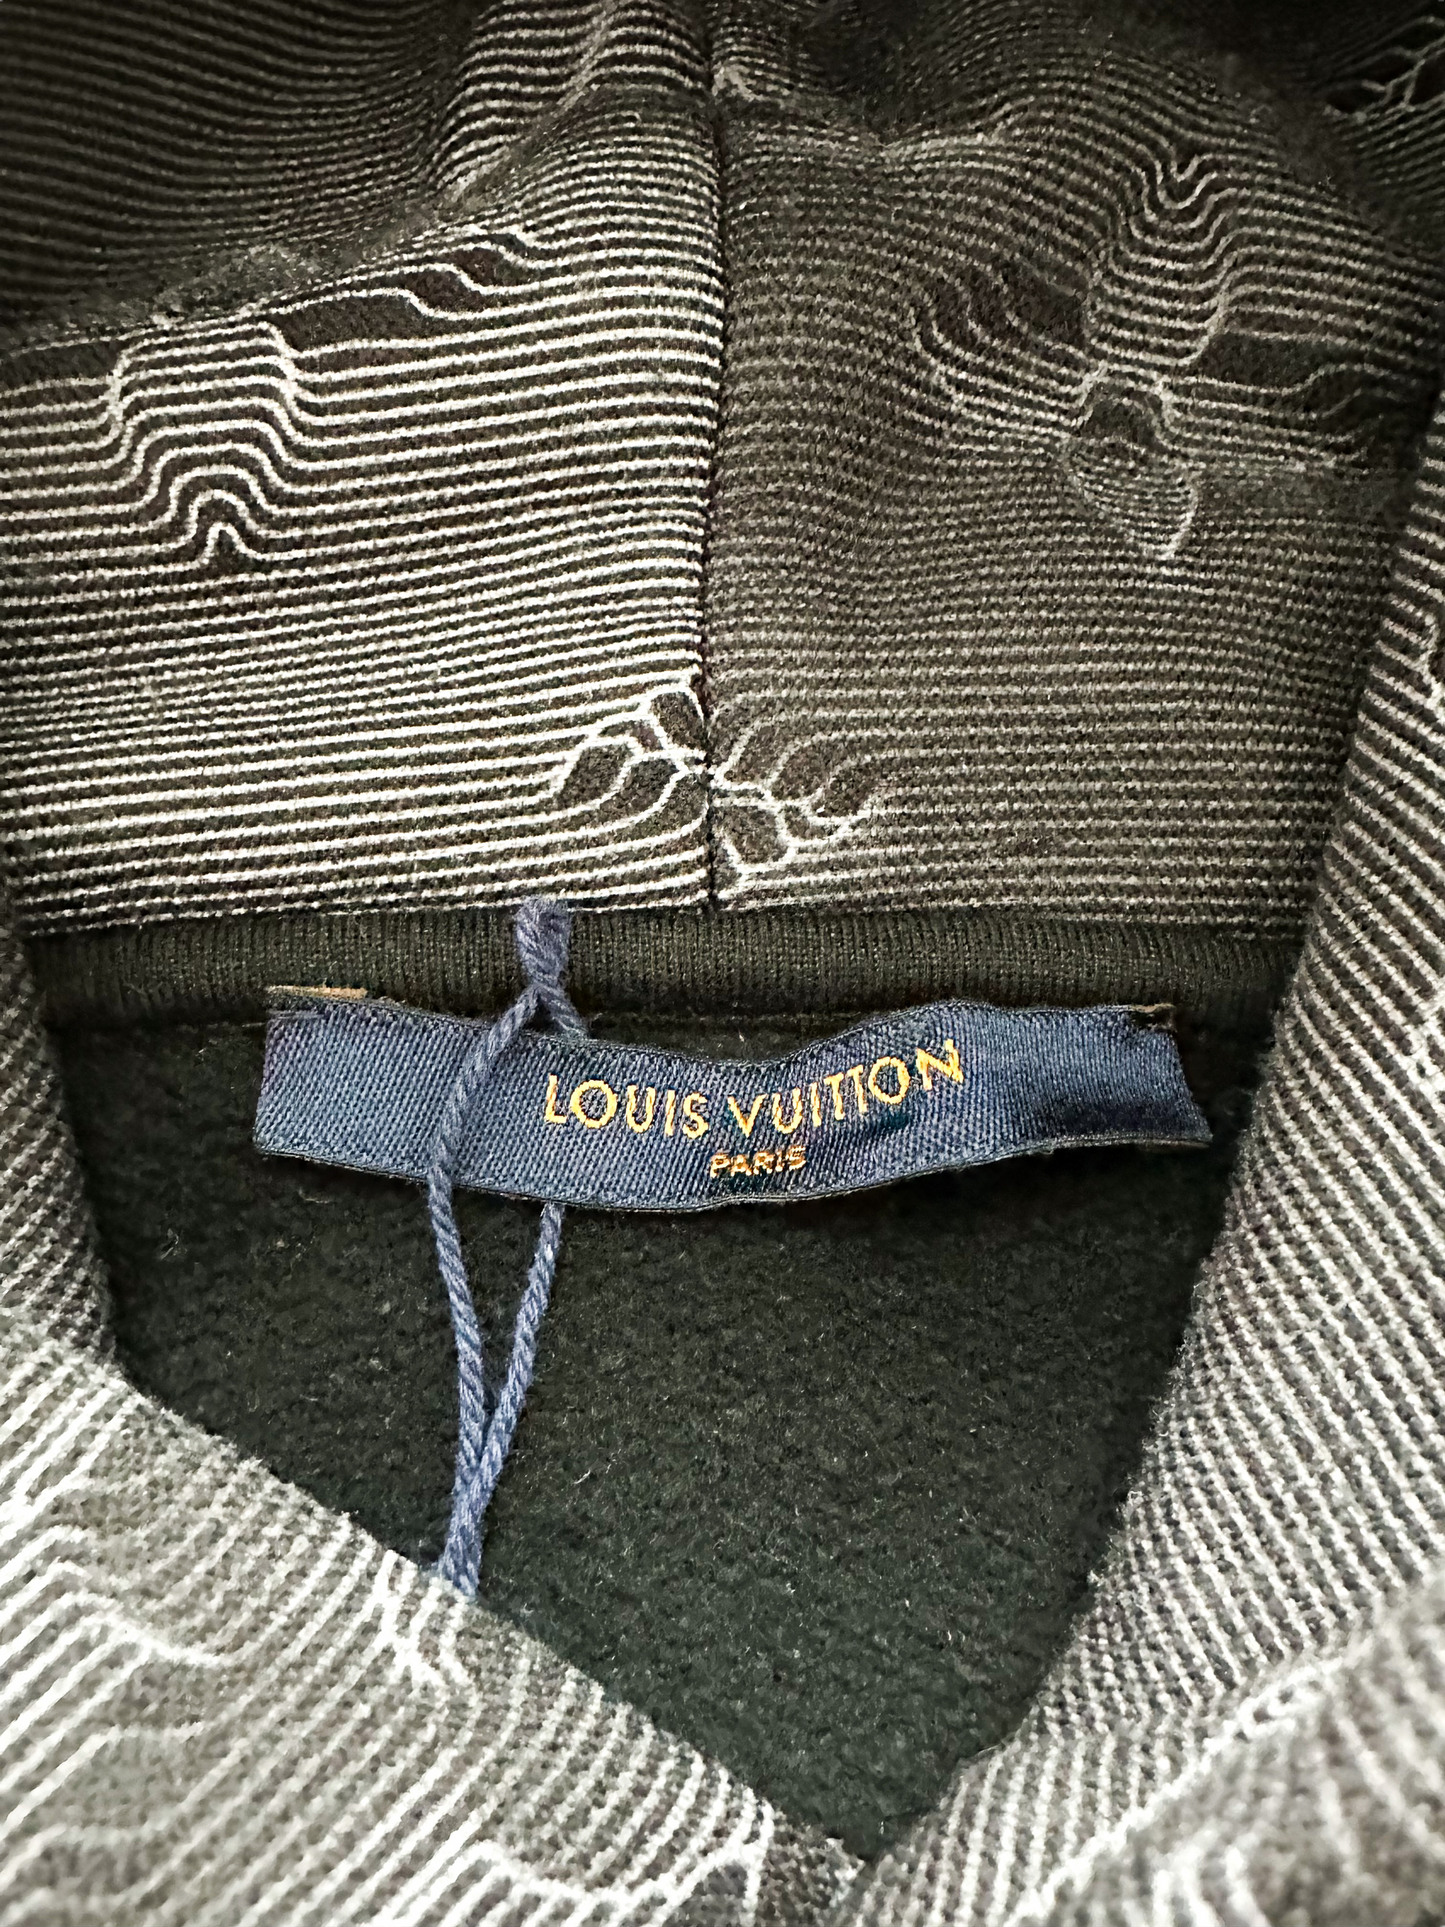 LOUIS VUITTON 2054 HOODIE ❄️ These pieces are not easy to get hold of! Size  small available in hand, other sizes can be sourced on demand📞📞📞  Private, By Designer Lab